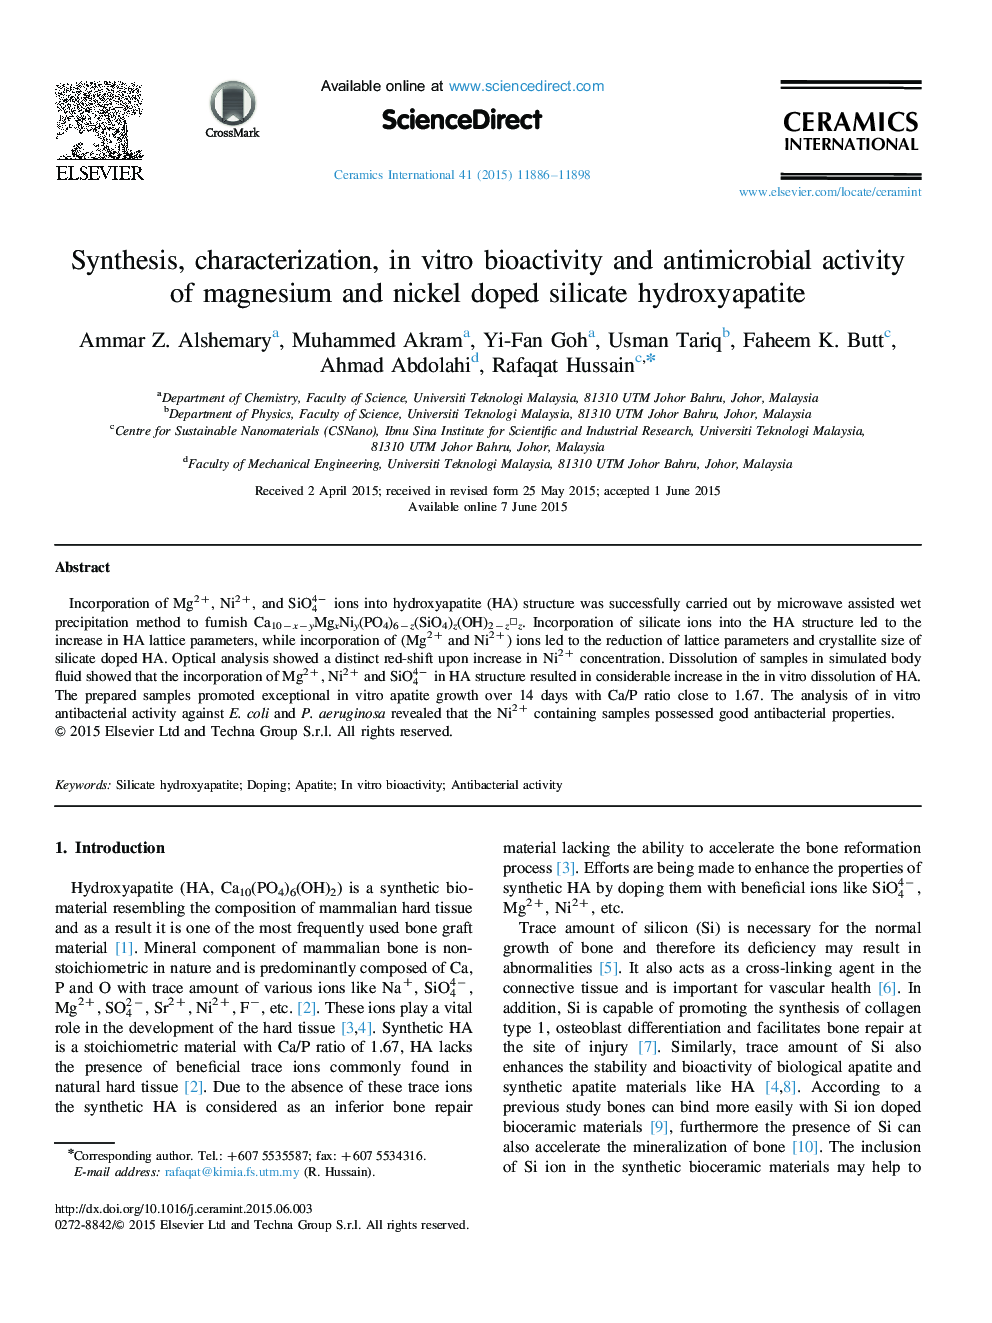 Synthesis, characterization, in vitro bioactivity and antimicrobial activity of magnesium and nickel doped silicate hydroxyapatite